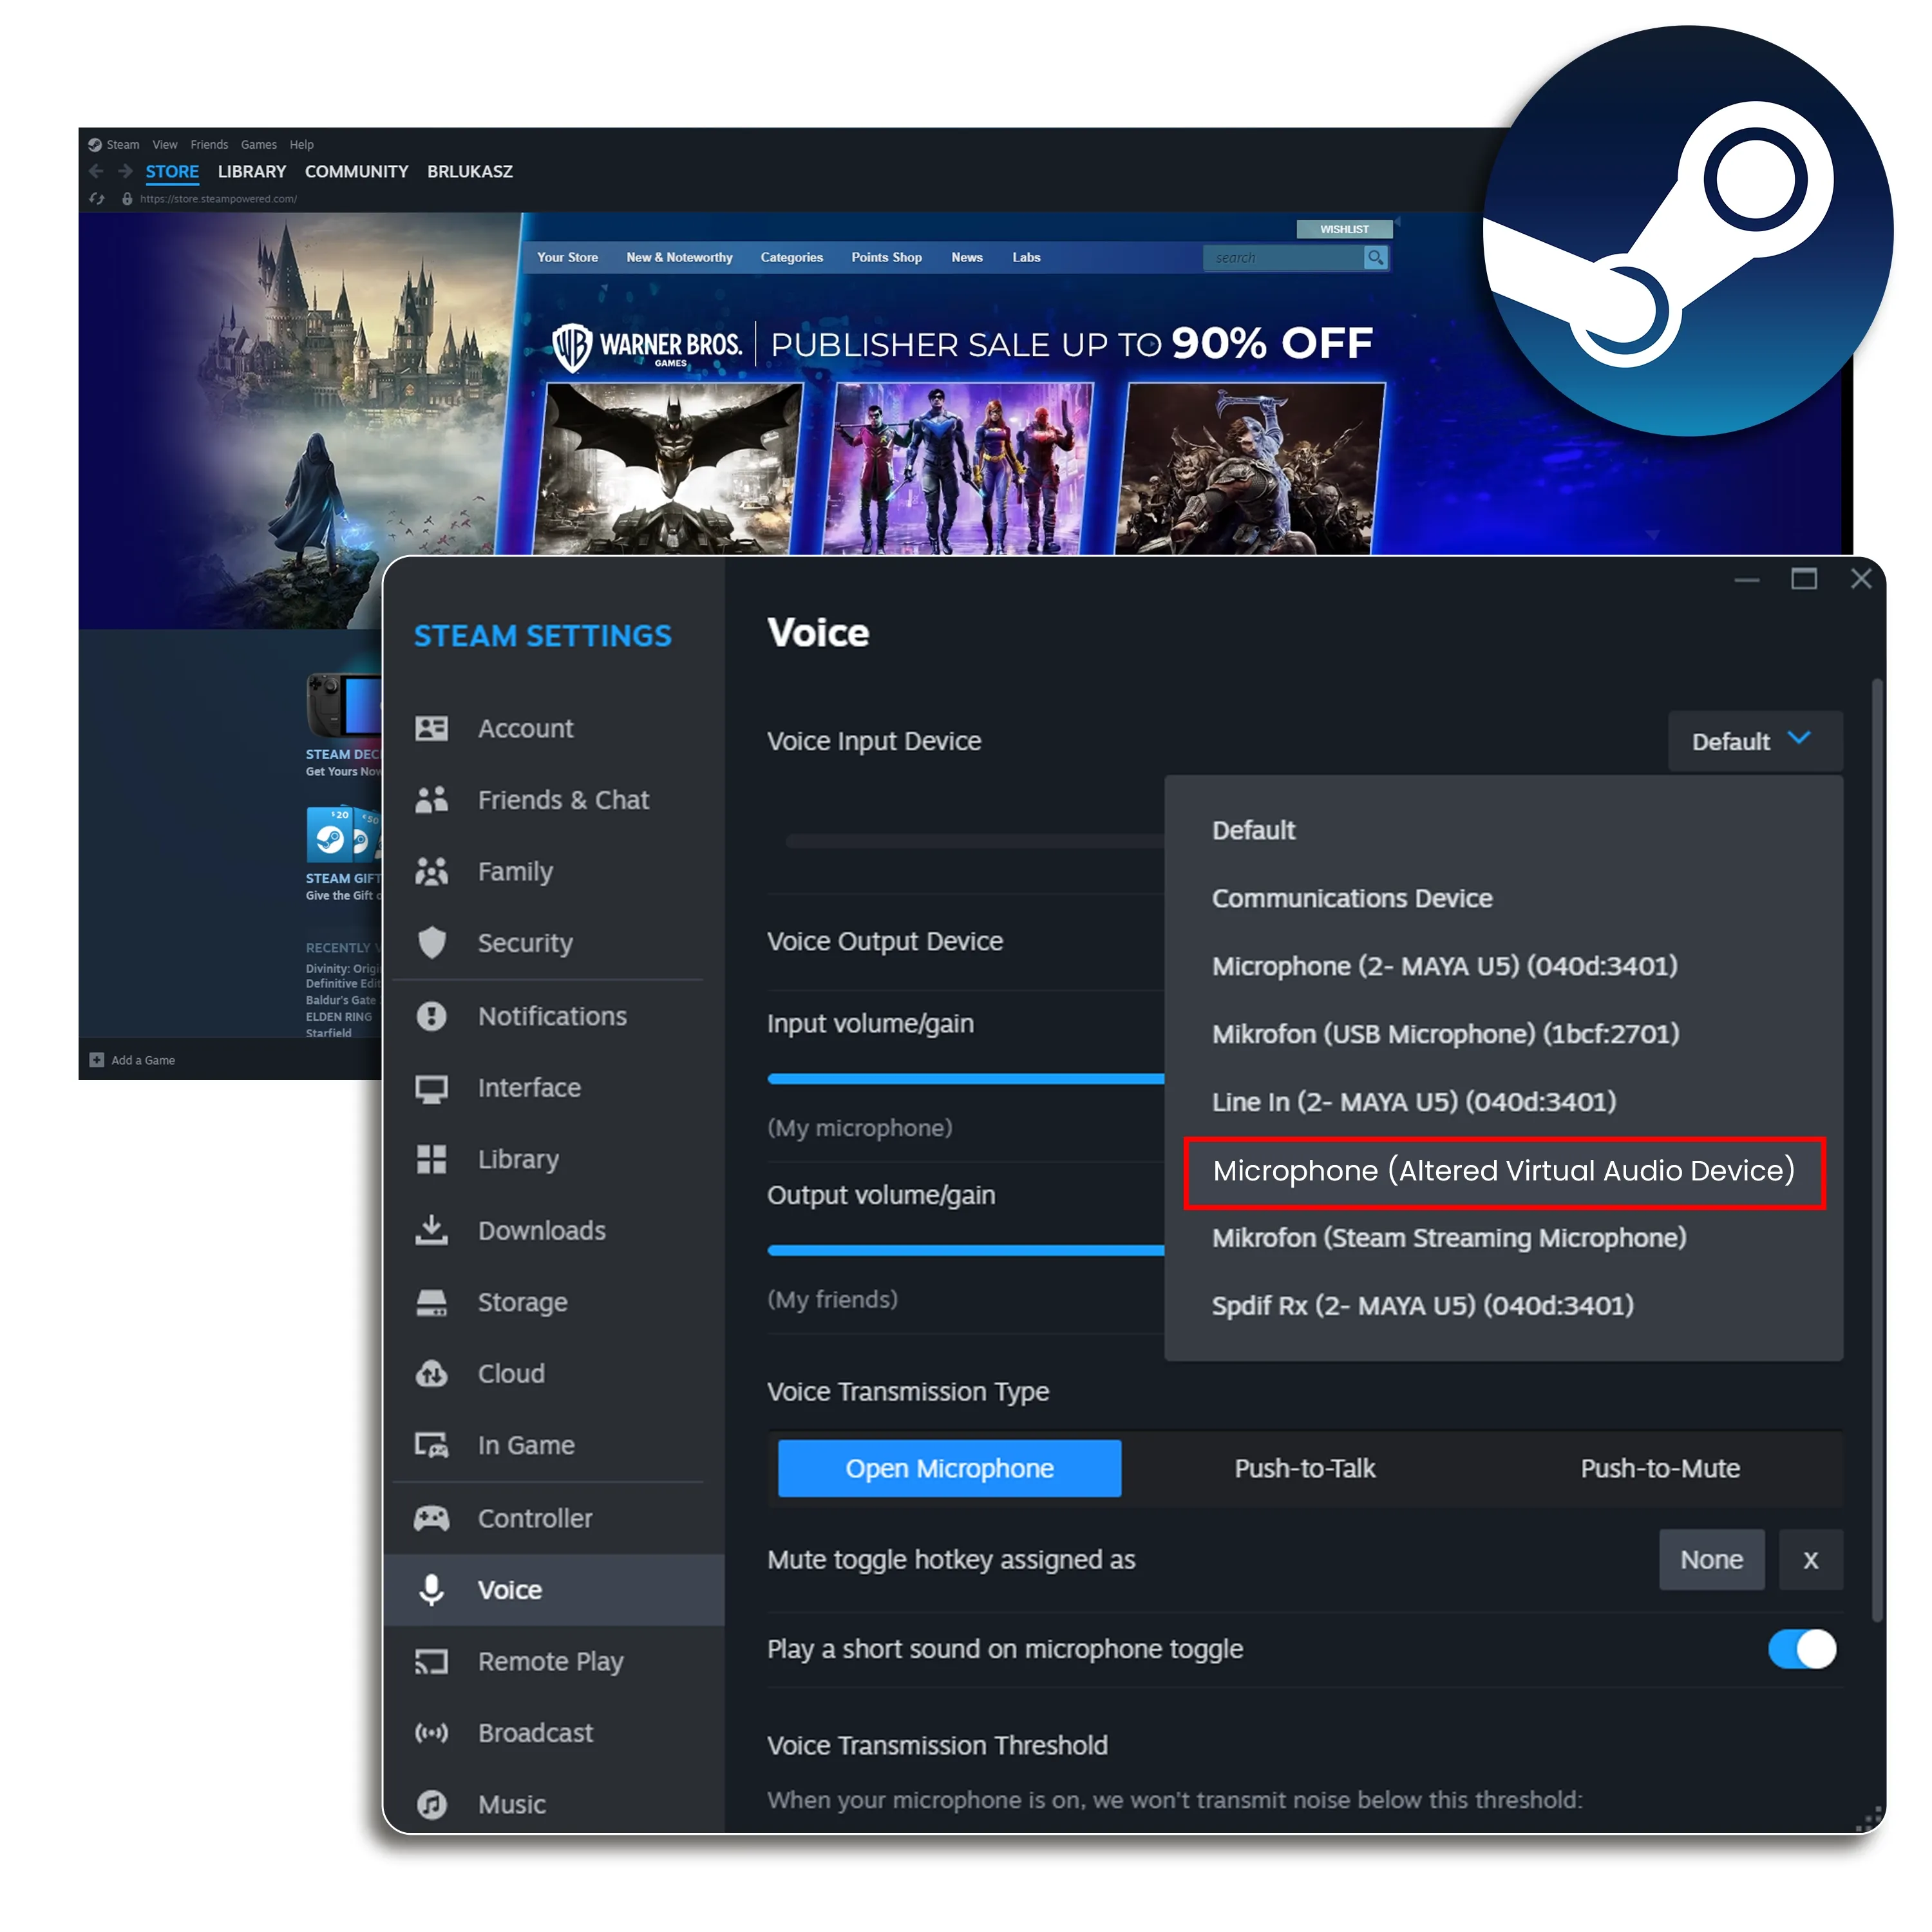 How to use Real-Time in Steam